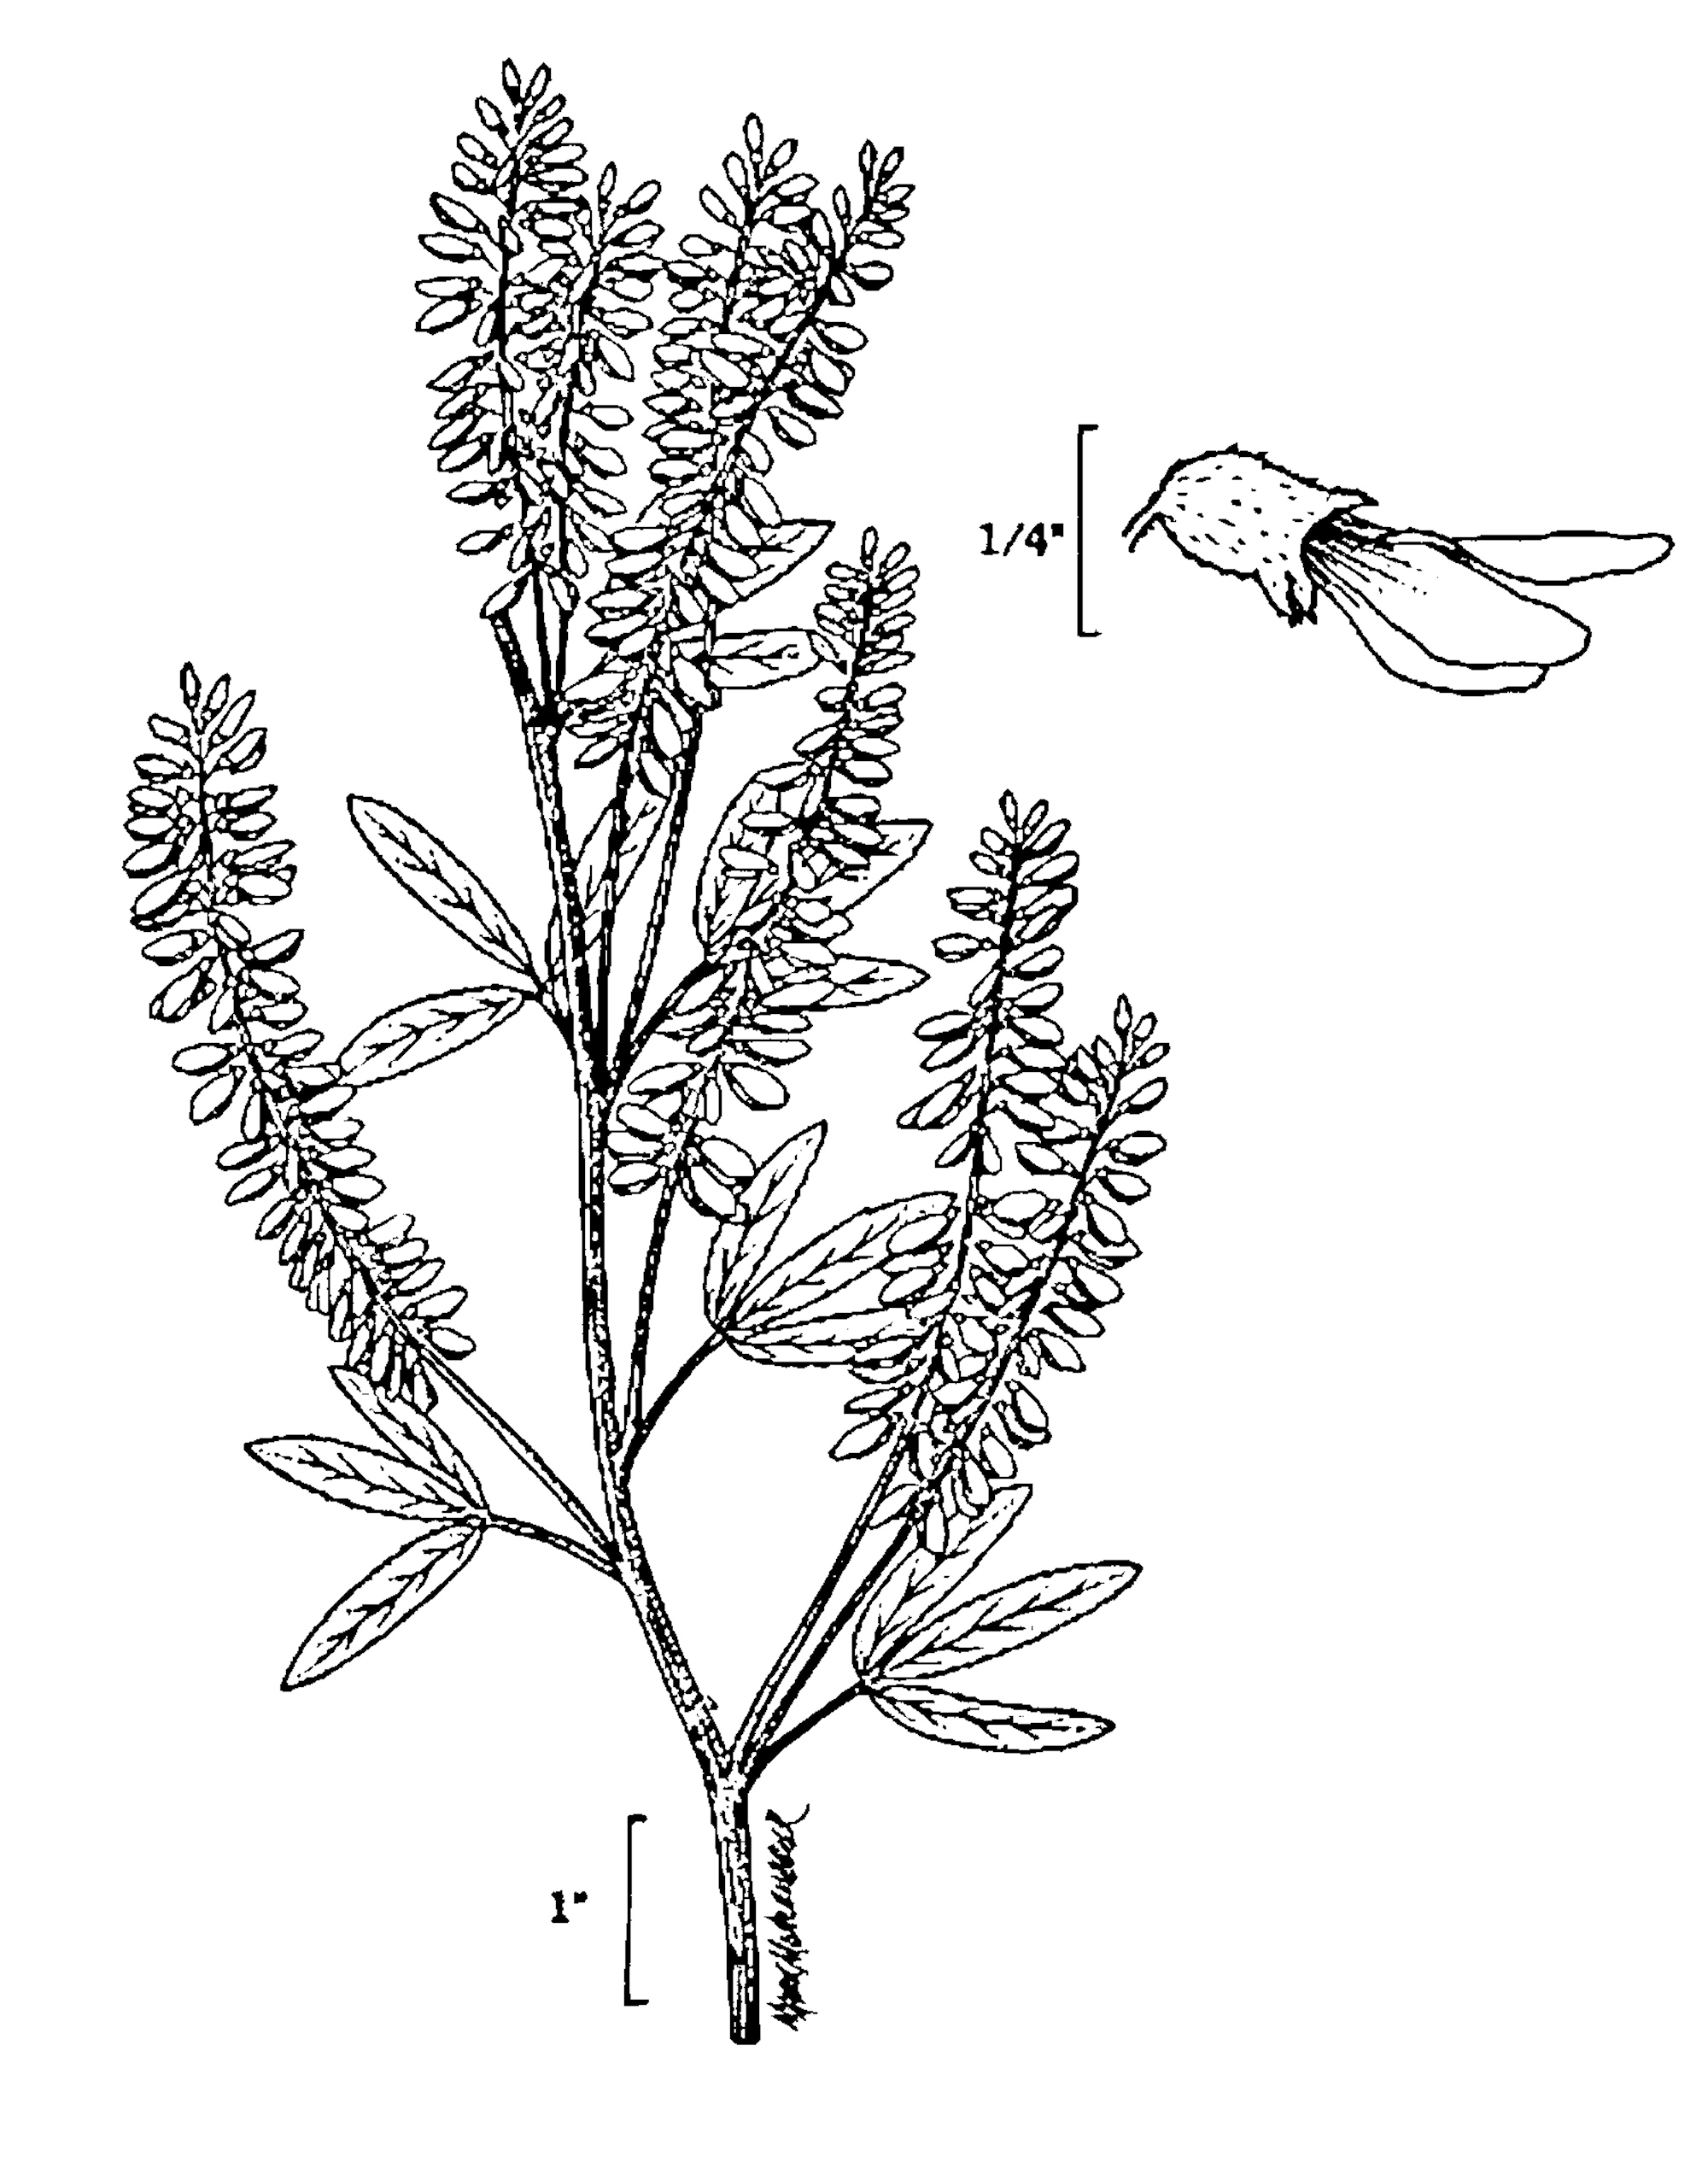 White Sweet Clover line drawing from USDA  NRCS, Wetland flora: Field office illustrated guide to plant species.